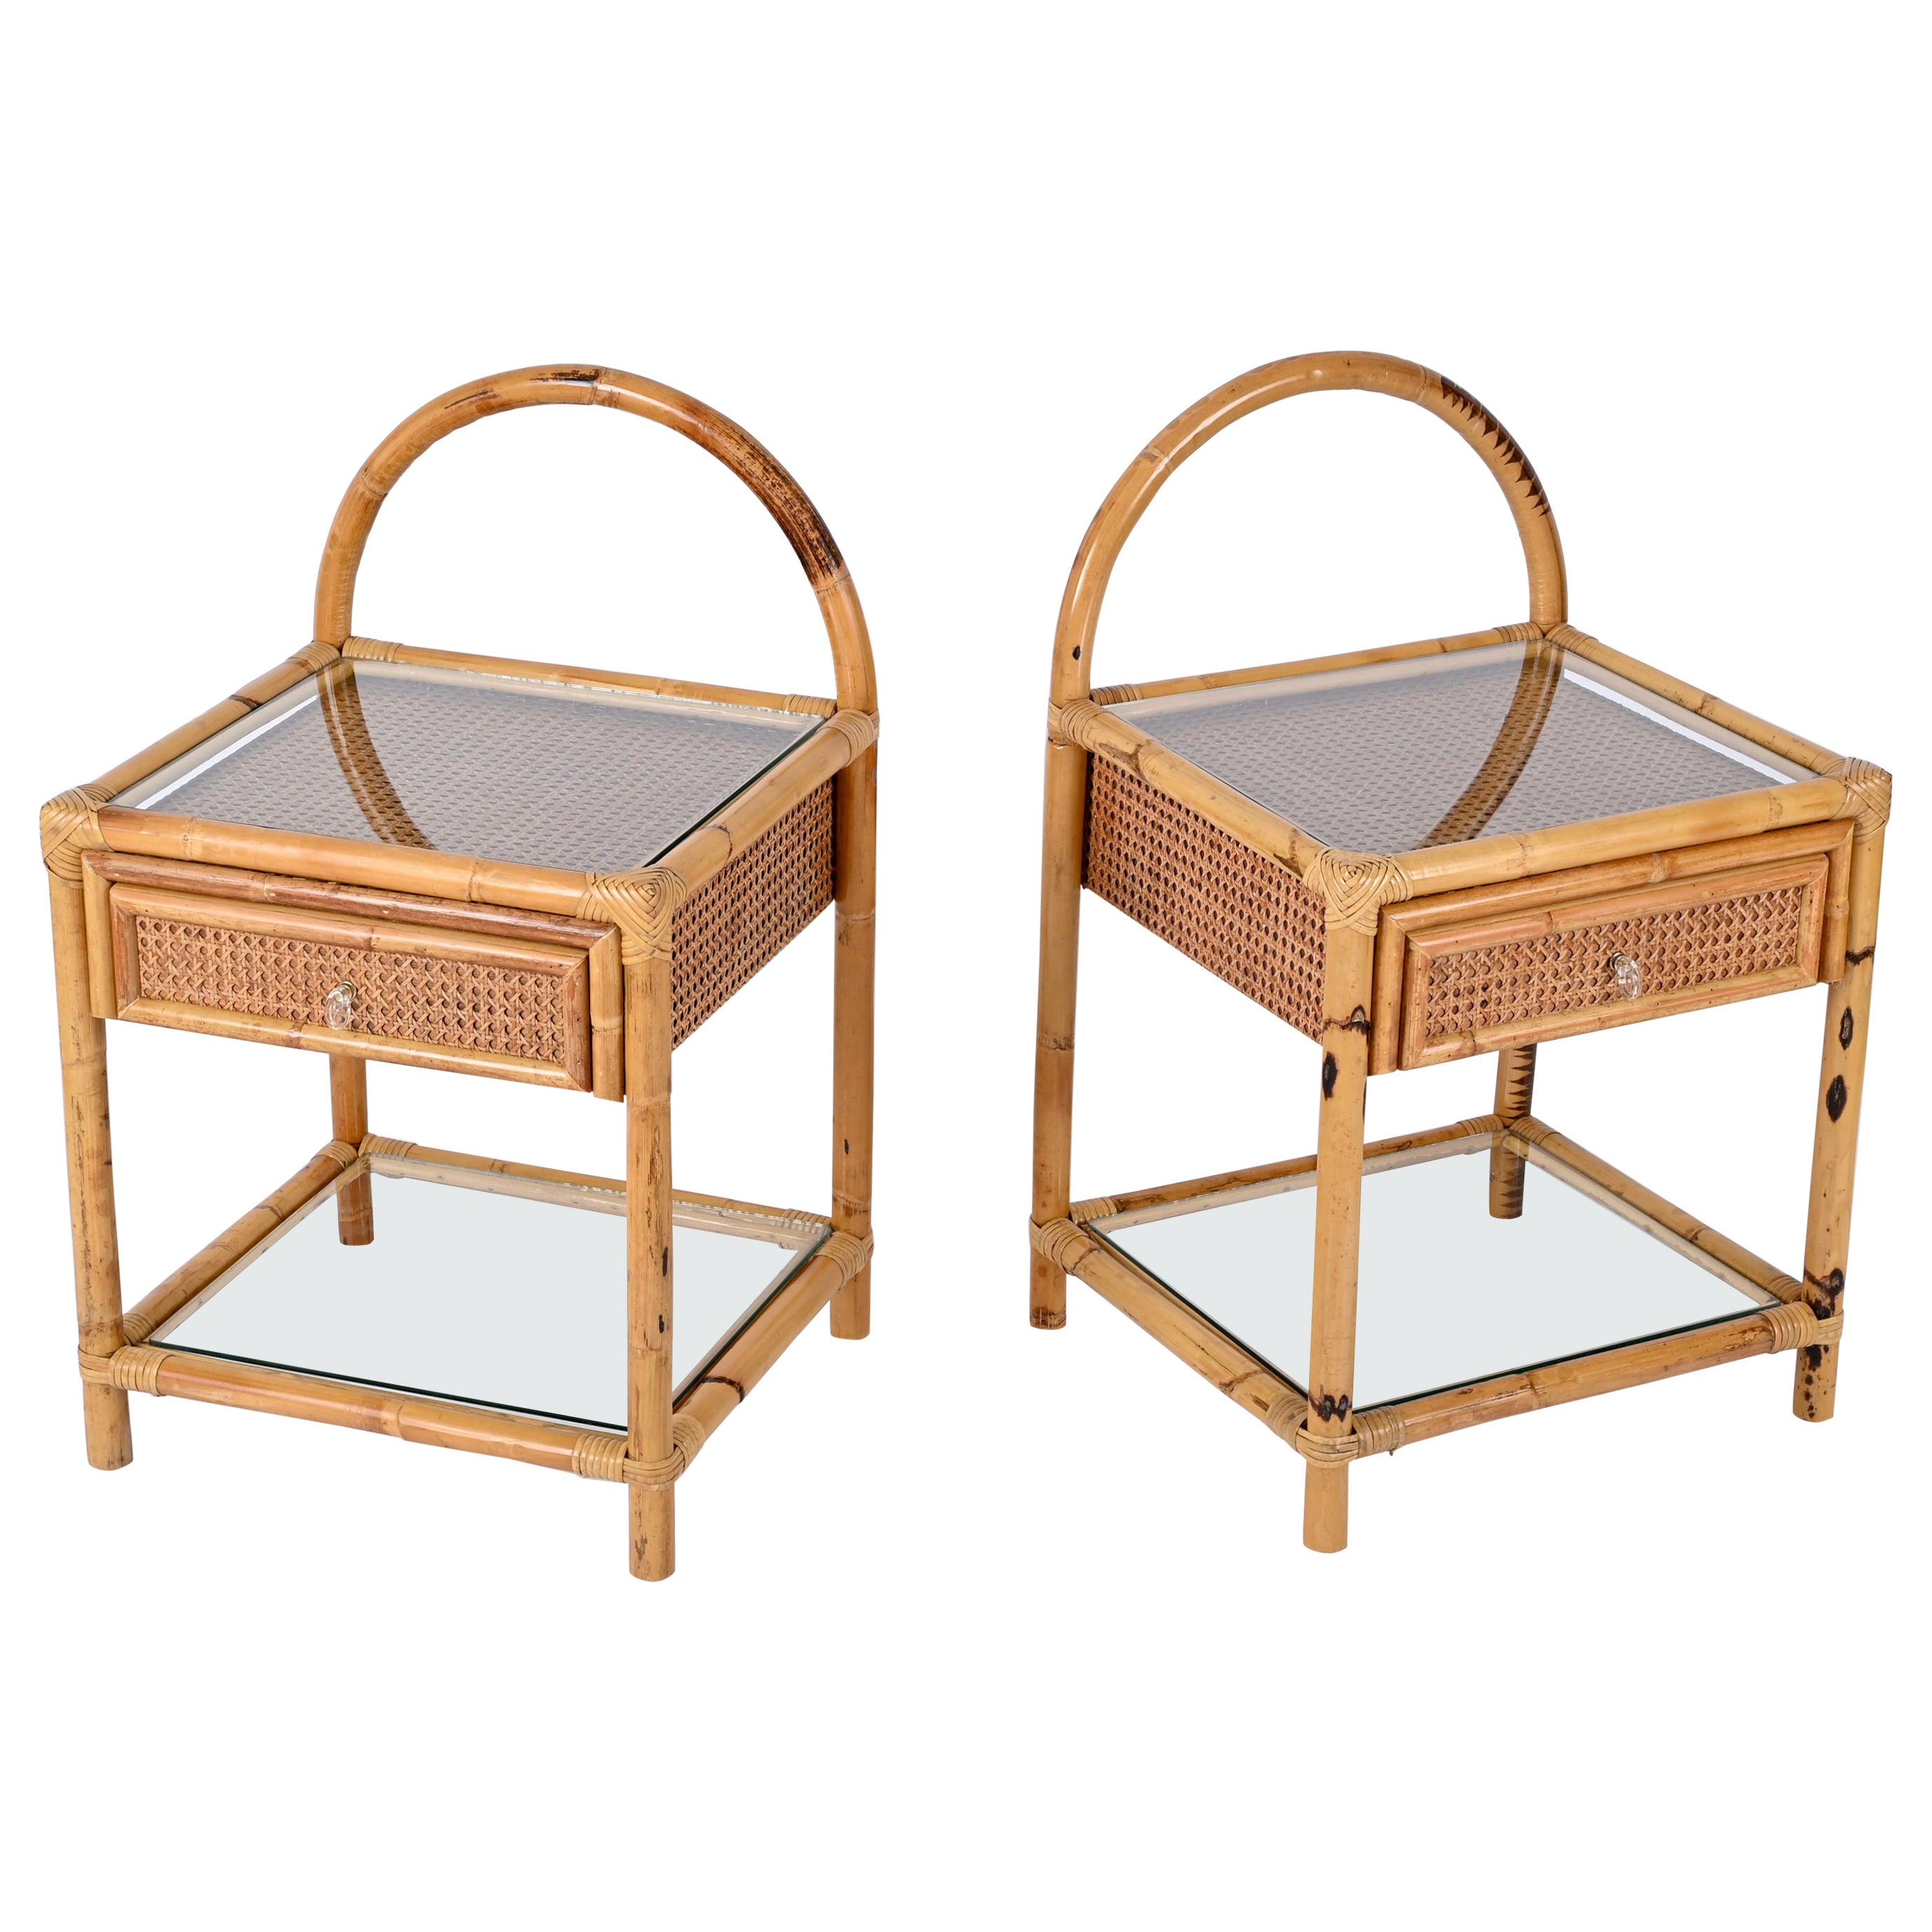 Pair of Mid-Century Bamboo, Rattan and Wicker Italian Bedside Tables, 1970s